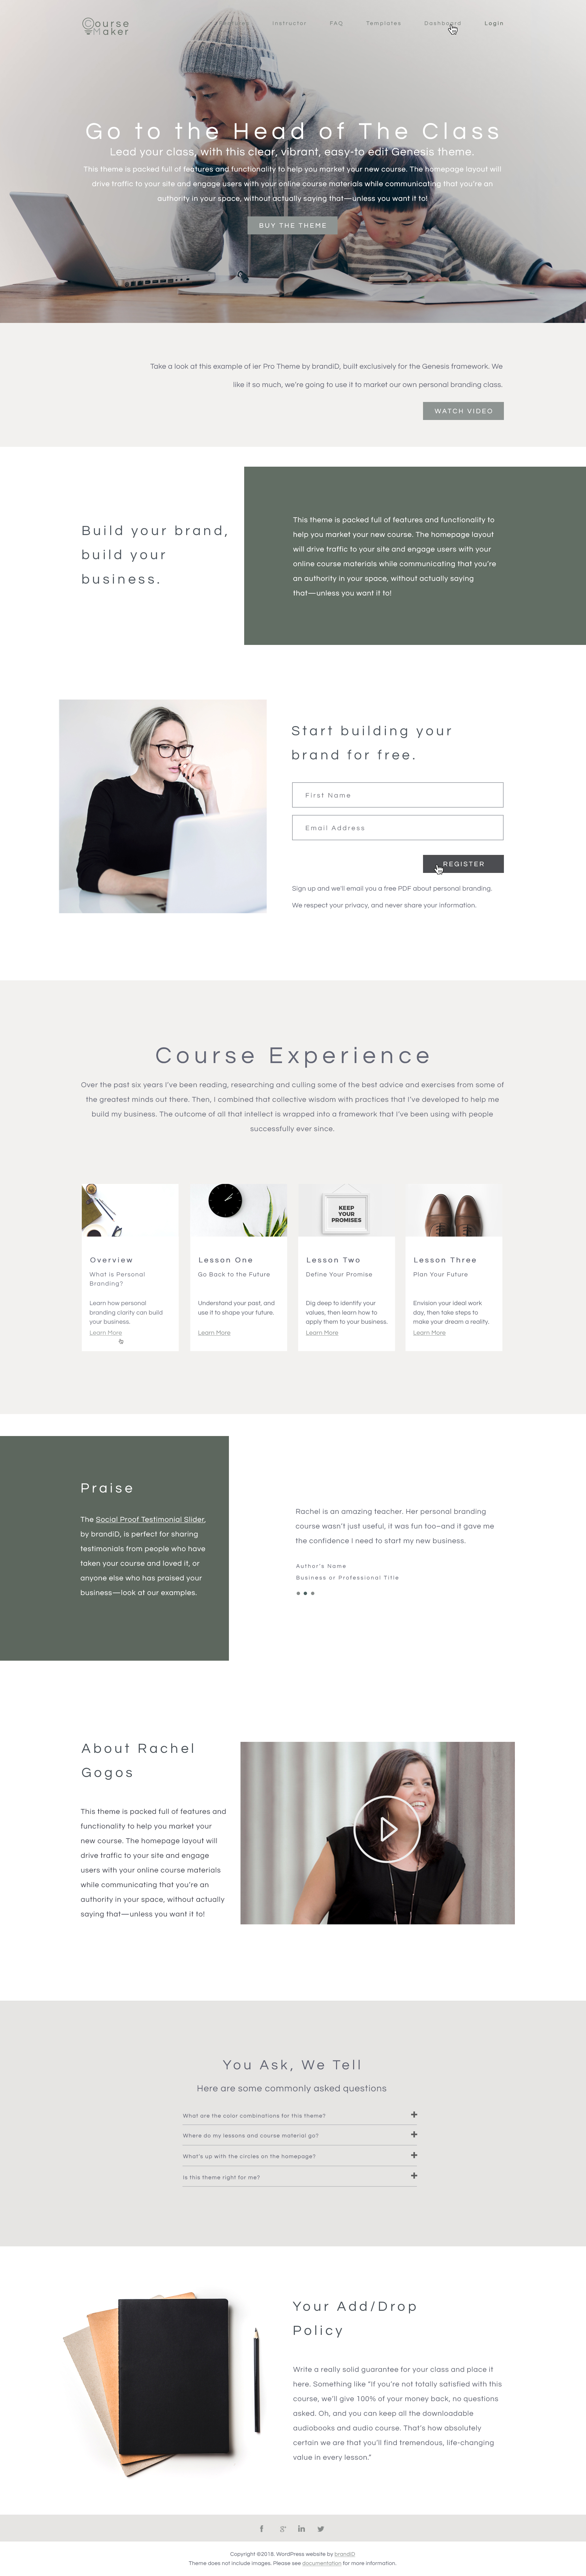 Course Maker Pro a WordPress Child theme built for the Genesis Framework. Featuring LearnDash and LifterLMS integration.